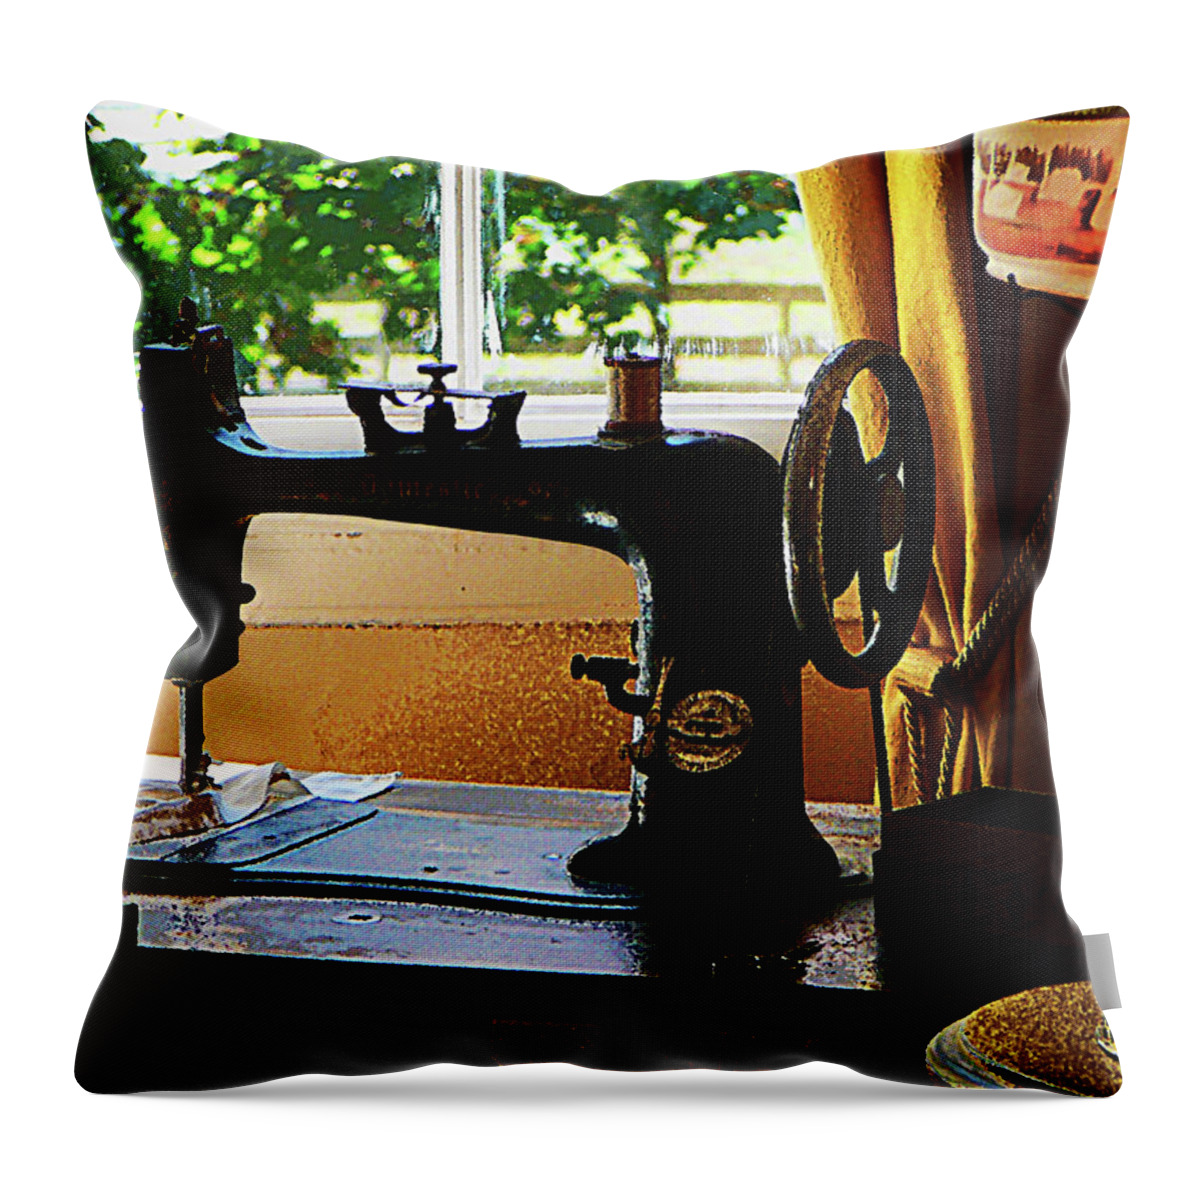 Sewing Machine Throw Pillow featuring the photograph Sewing Machine and Lamp by Susan Savad